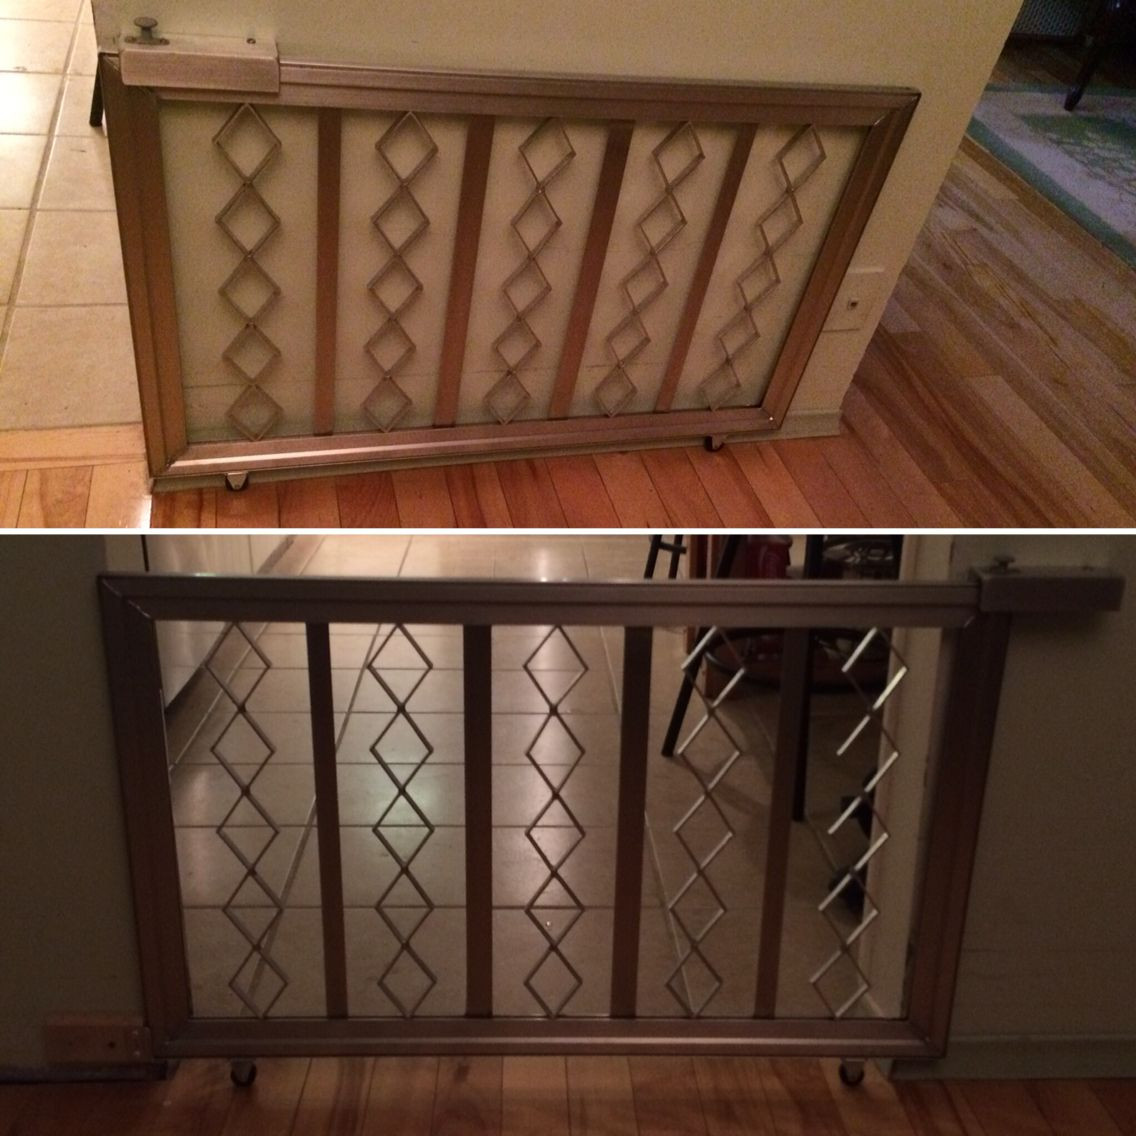 DIY Sliding Baby Gate
 Need something to keep the dogs out of the kitchen while I